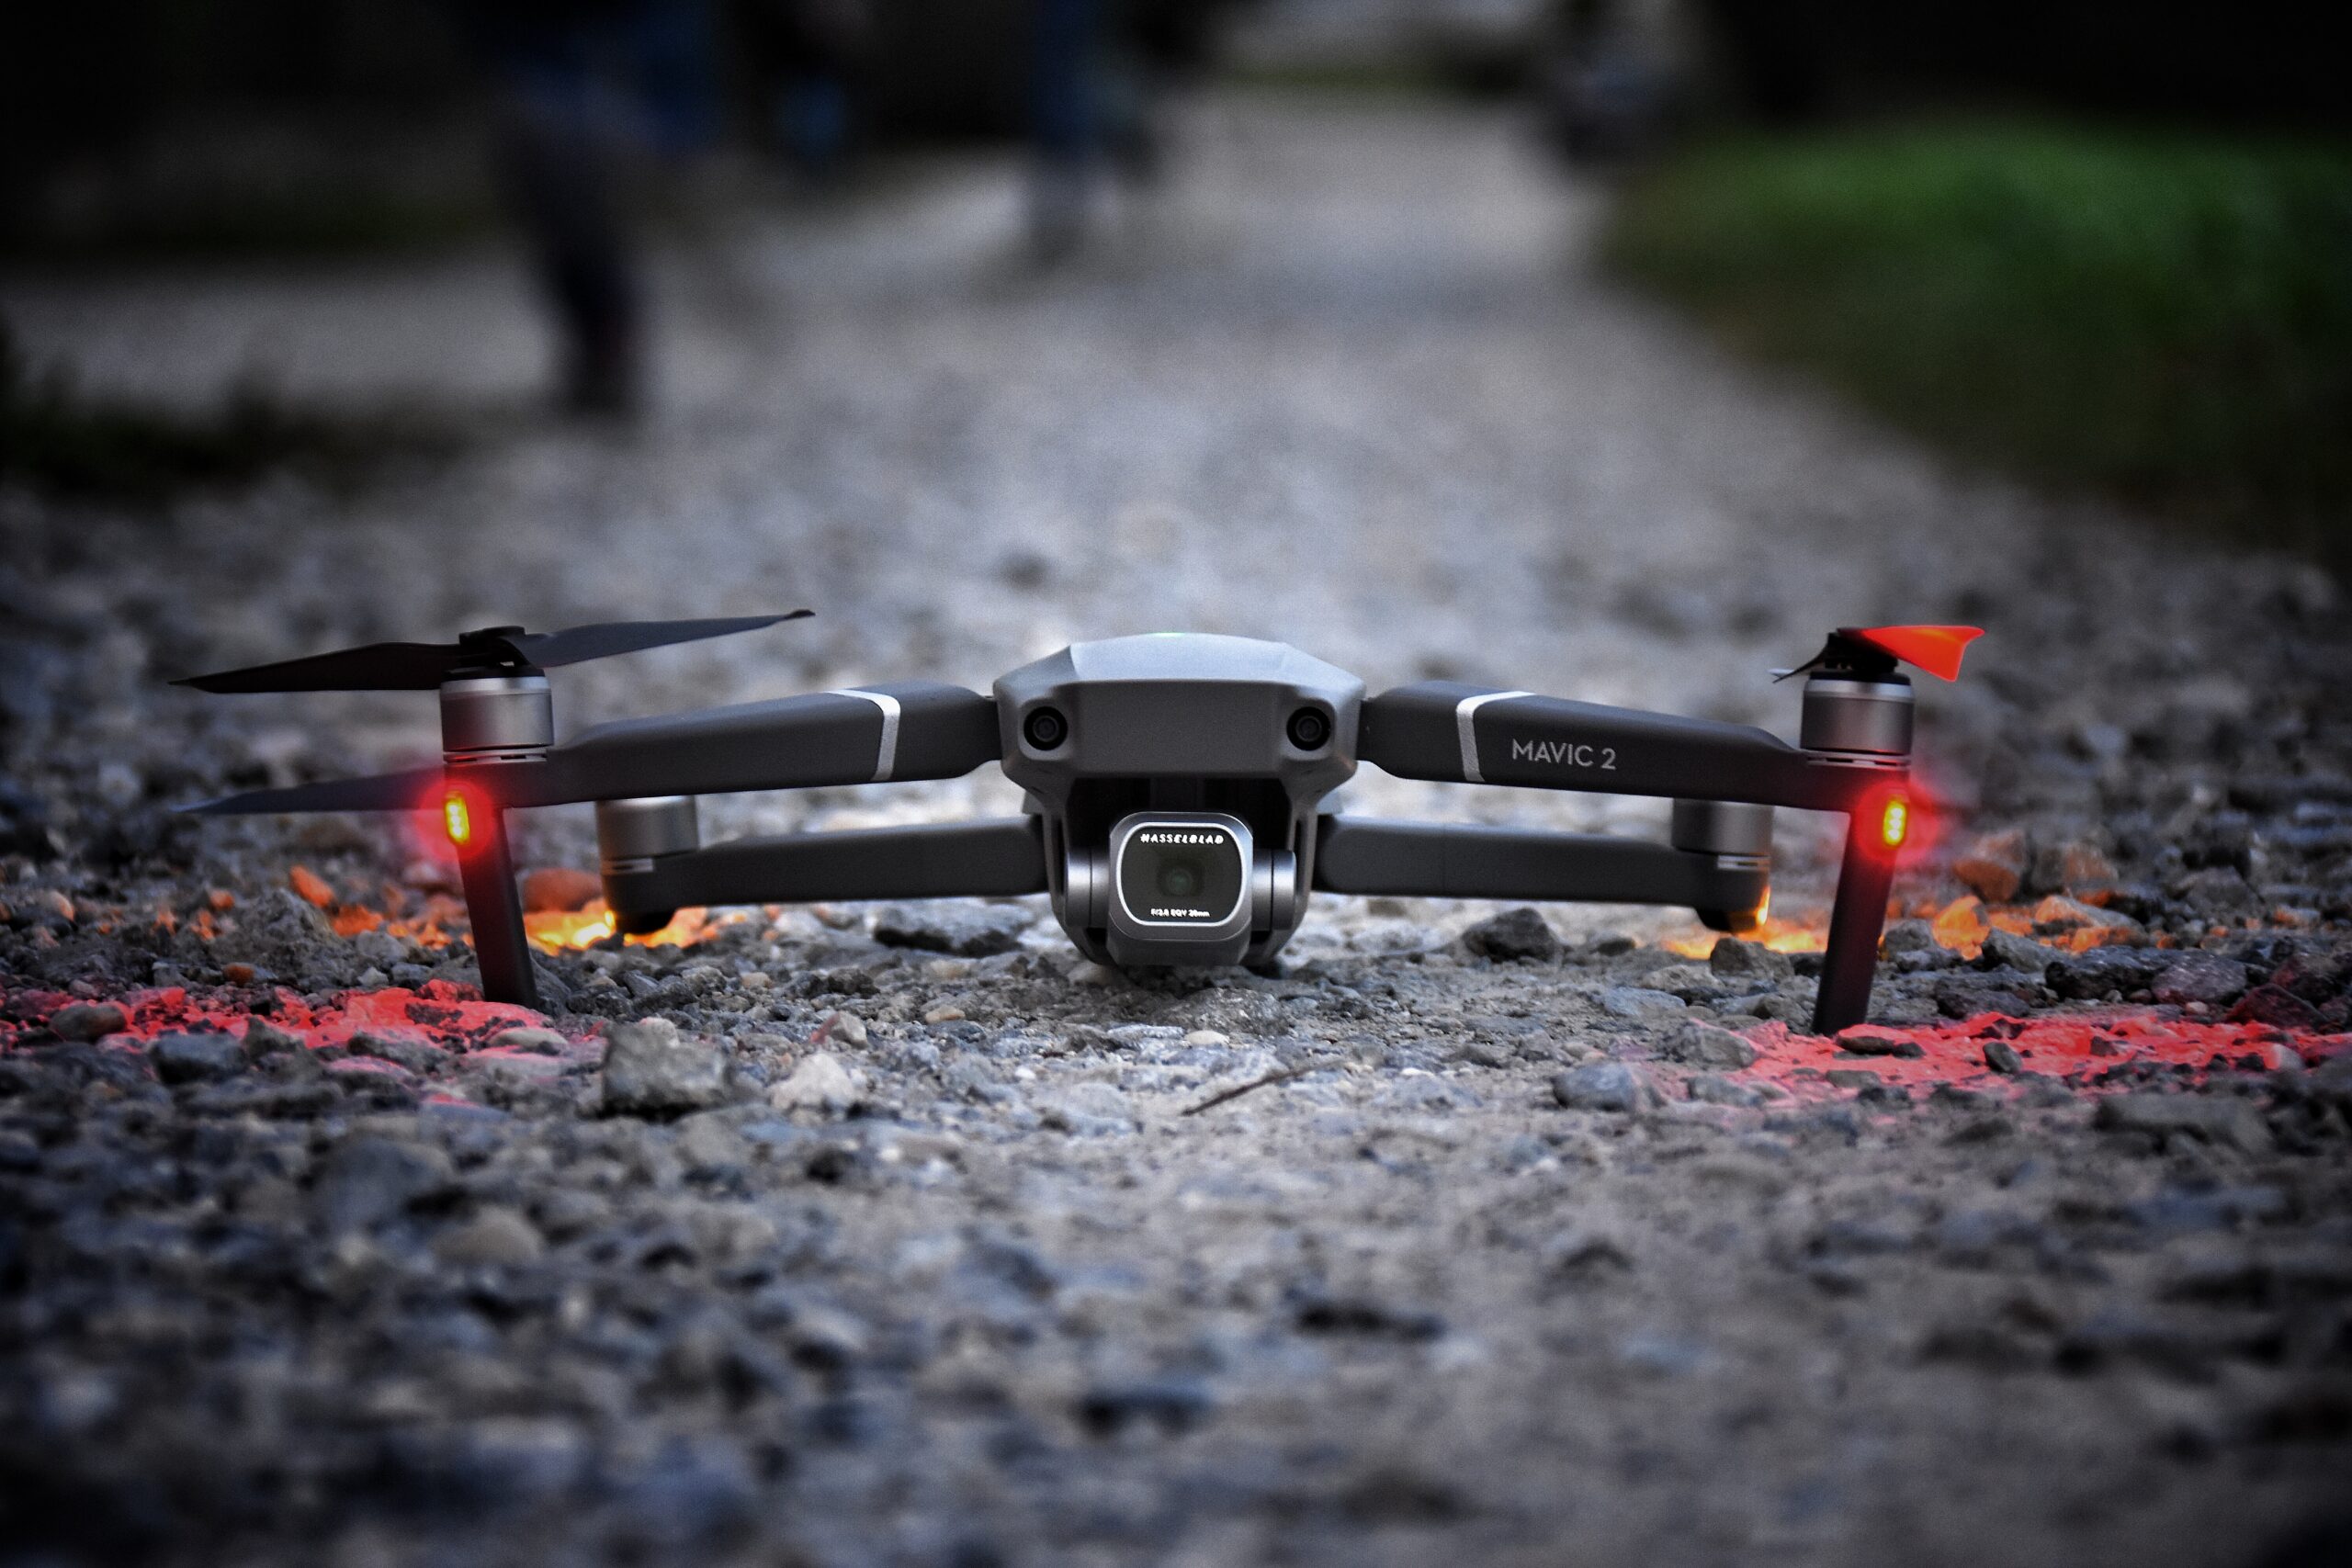 Top Reasons For Drone Accidents